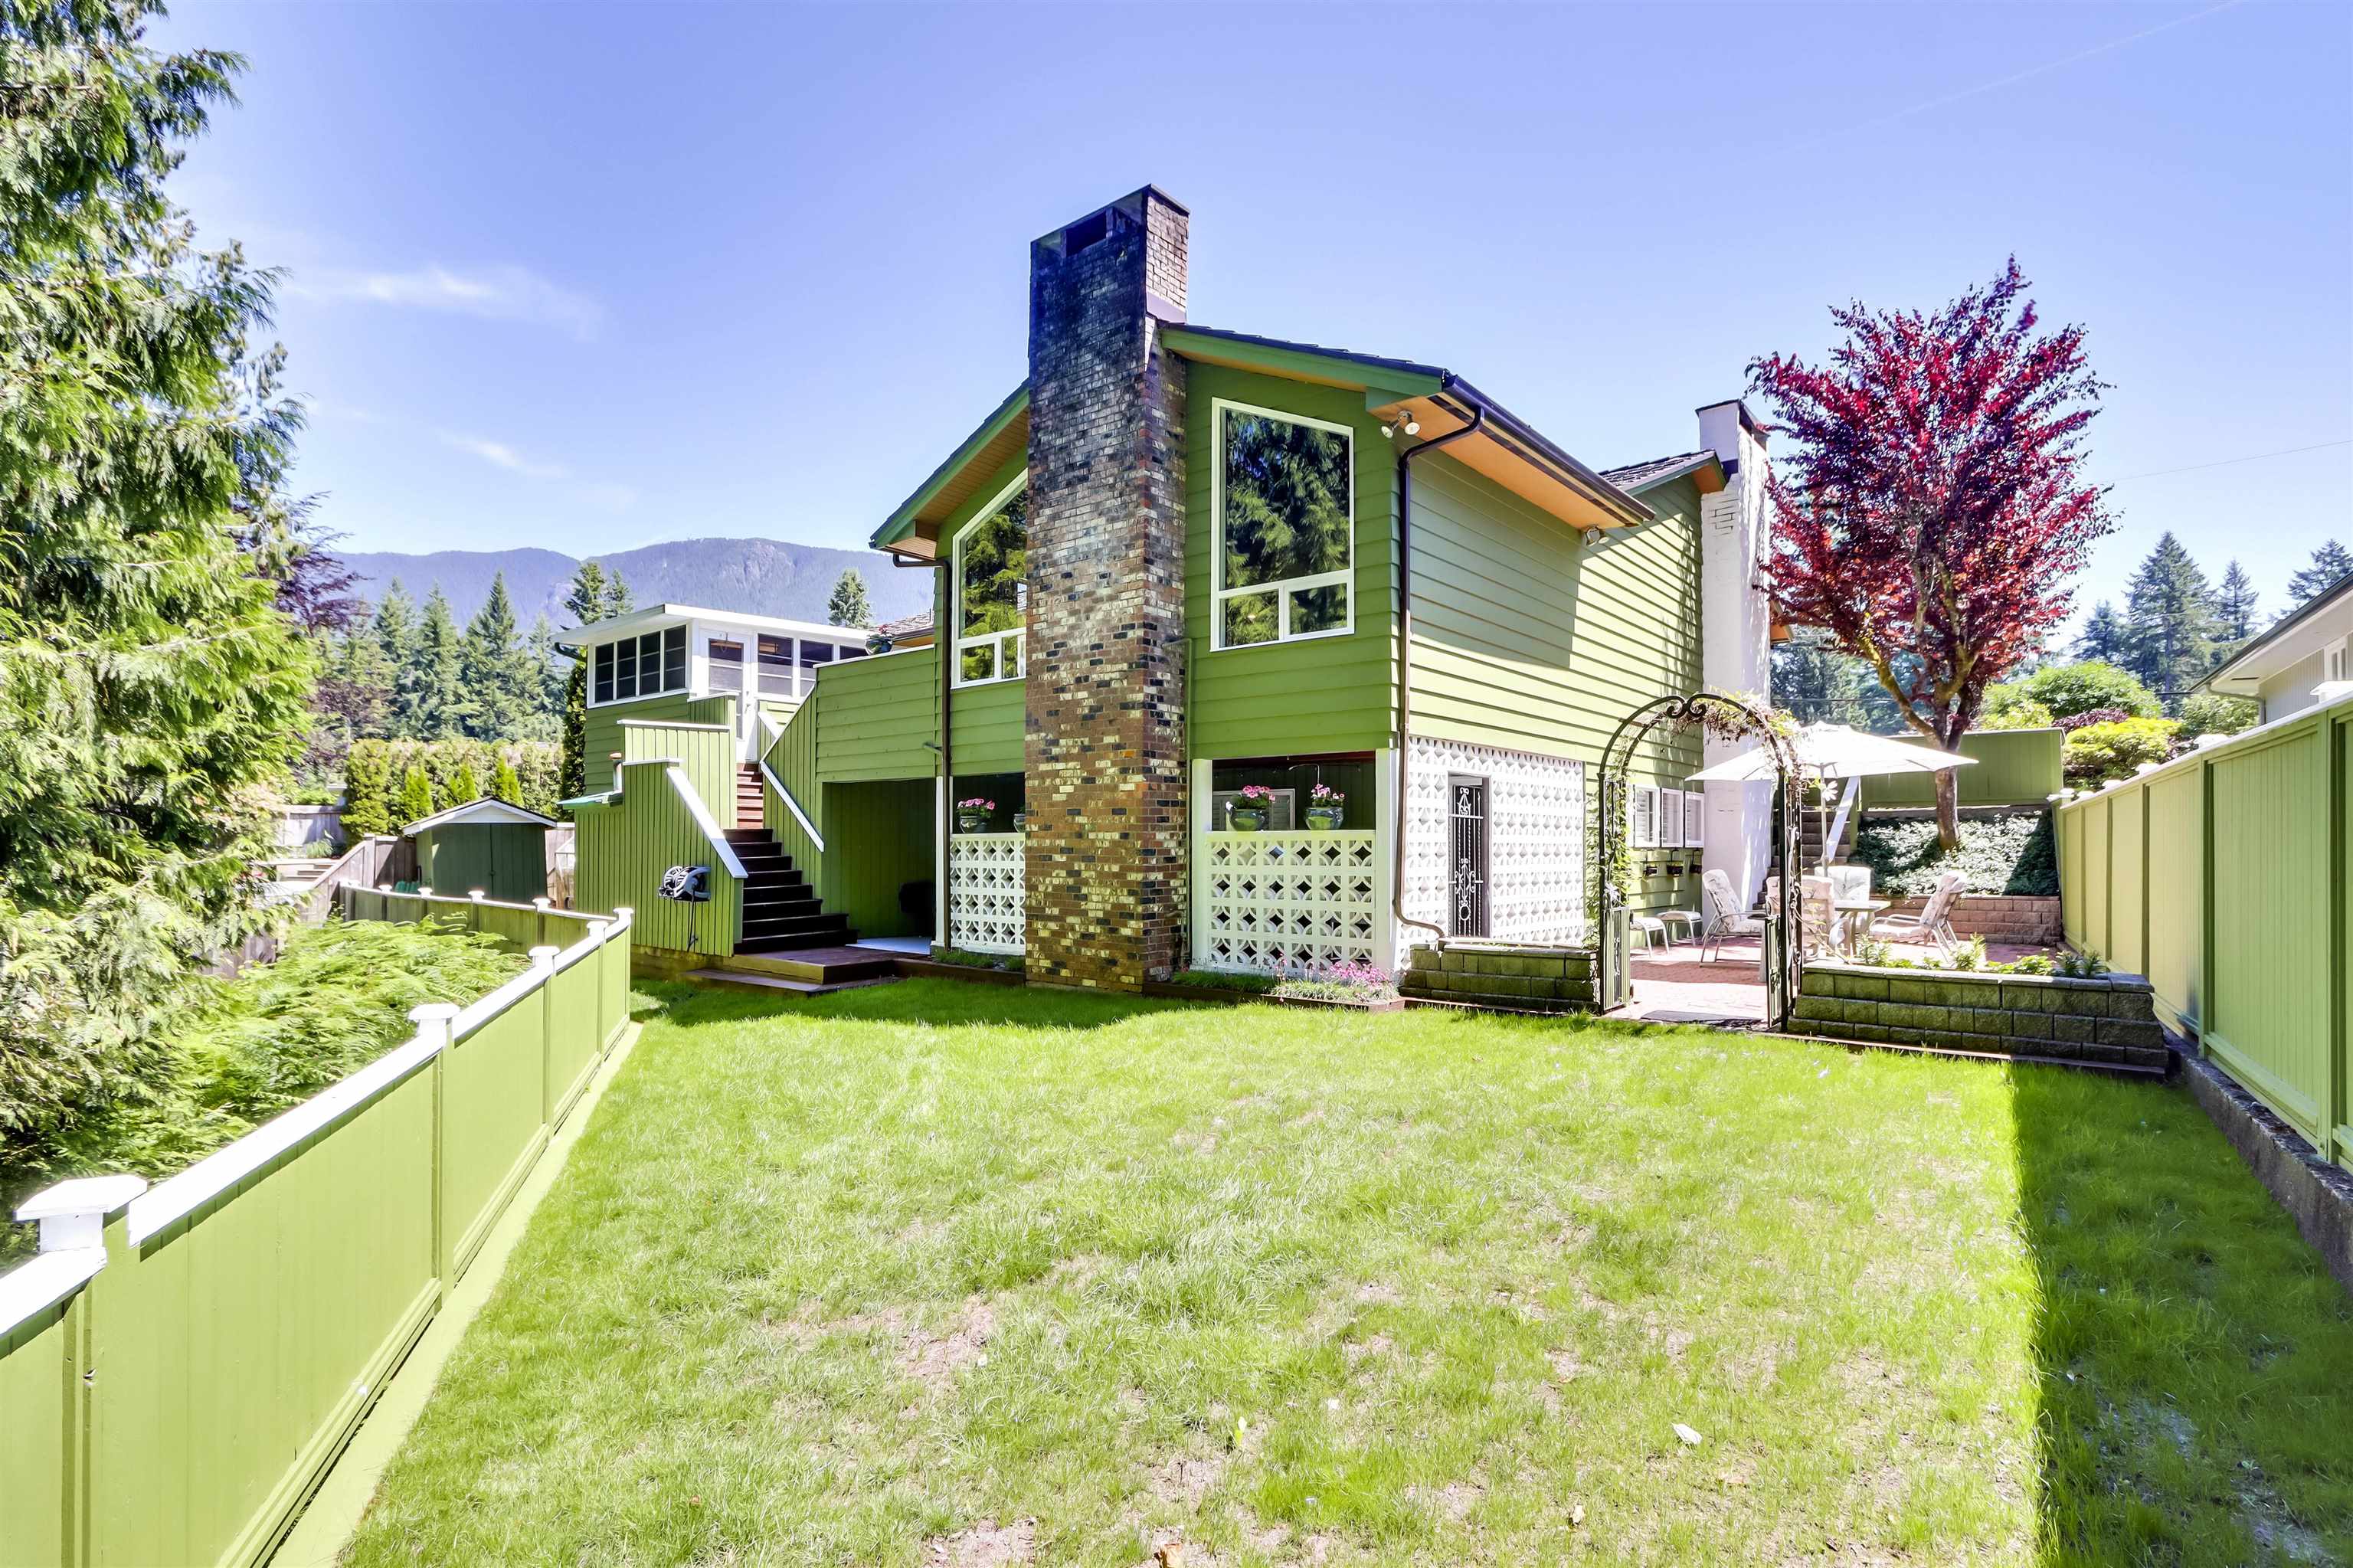 Listing image of 4343 PATTERDALE DRIVE